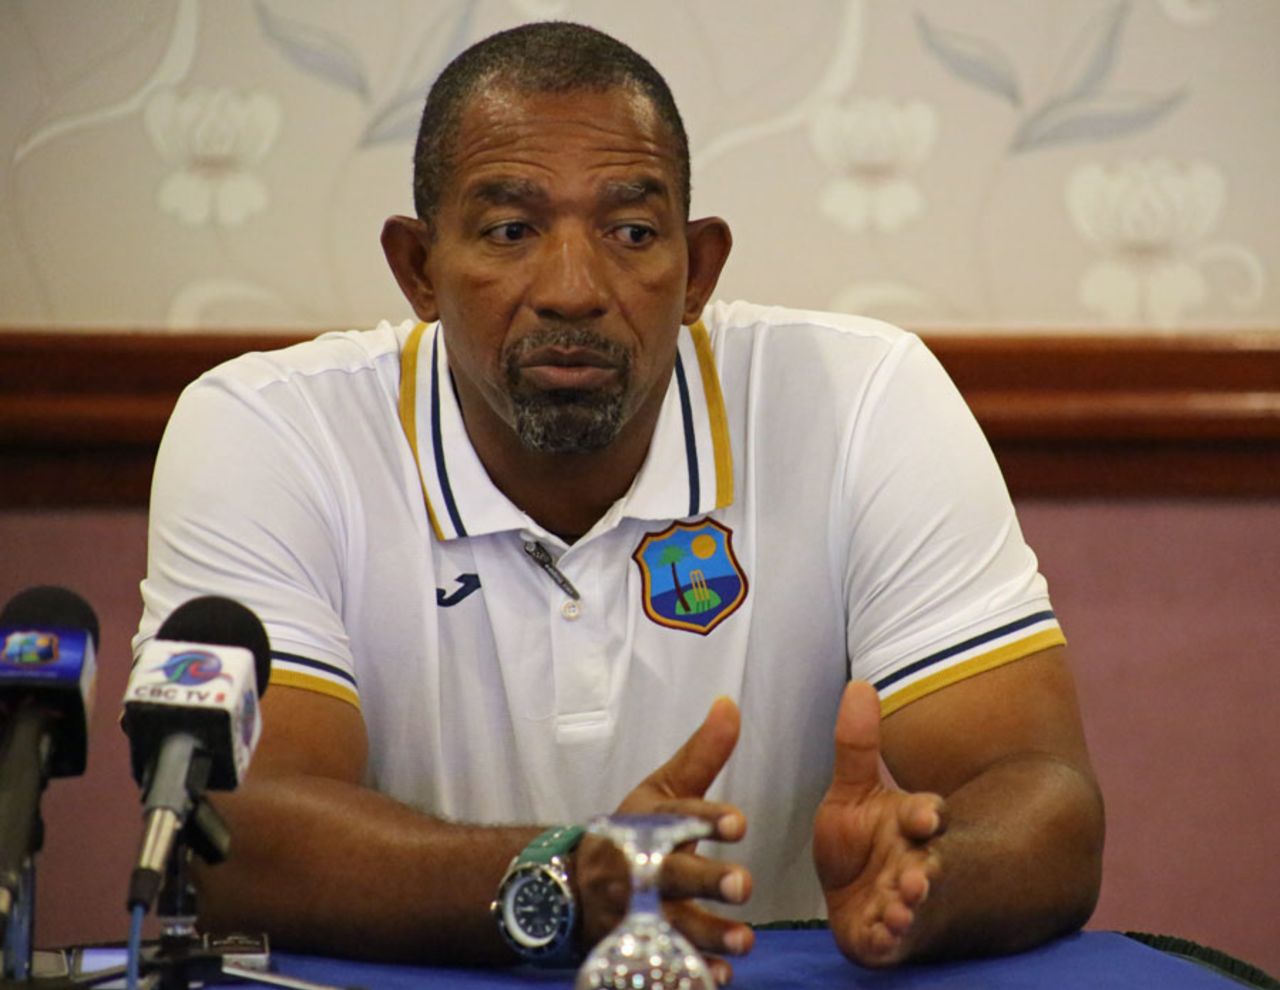 West Indies coach Phil Simmons responds to a question during a media conference, Barbados, May 24, 2015